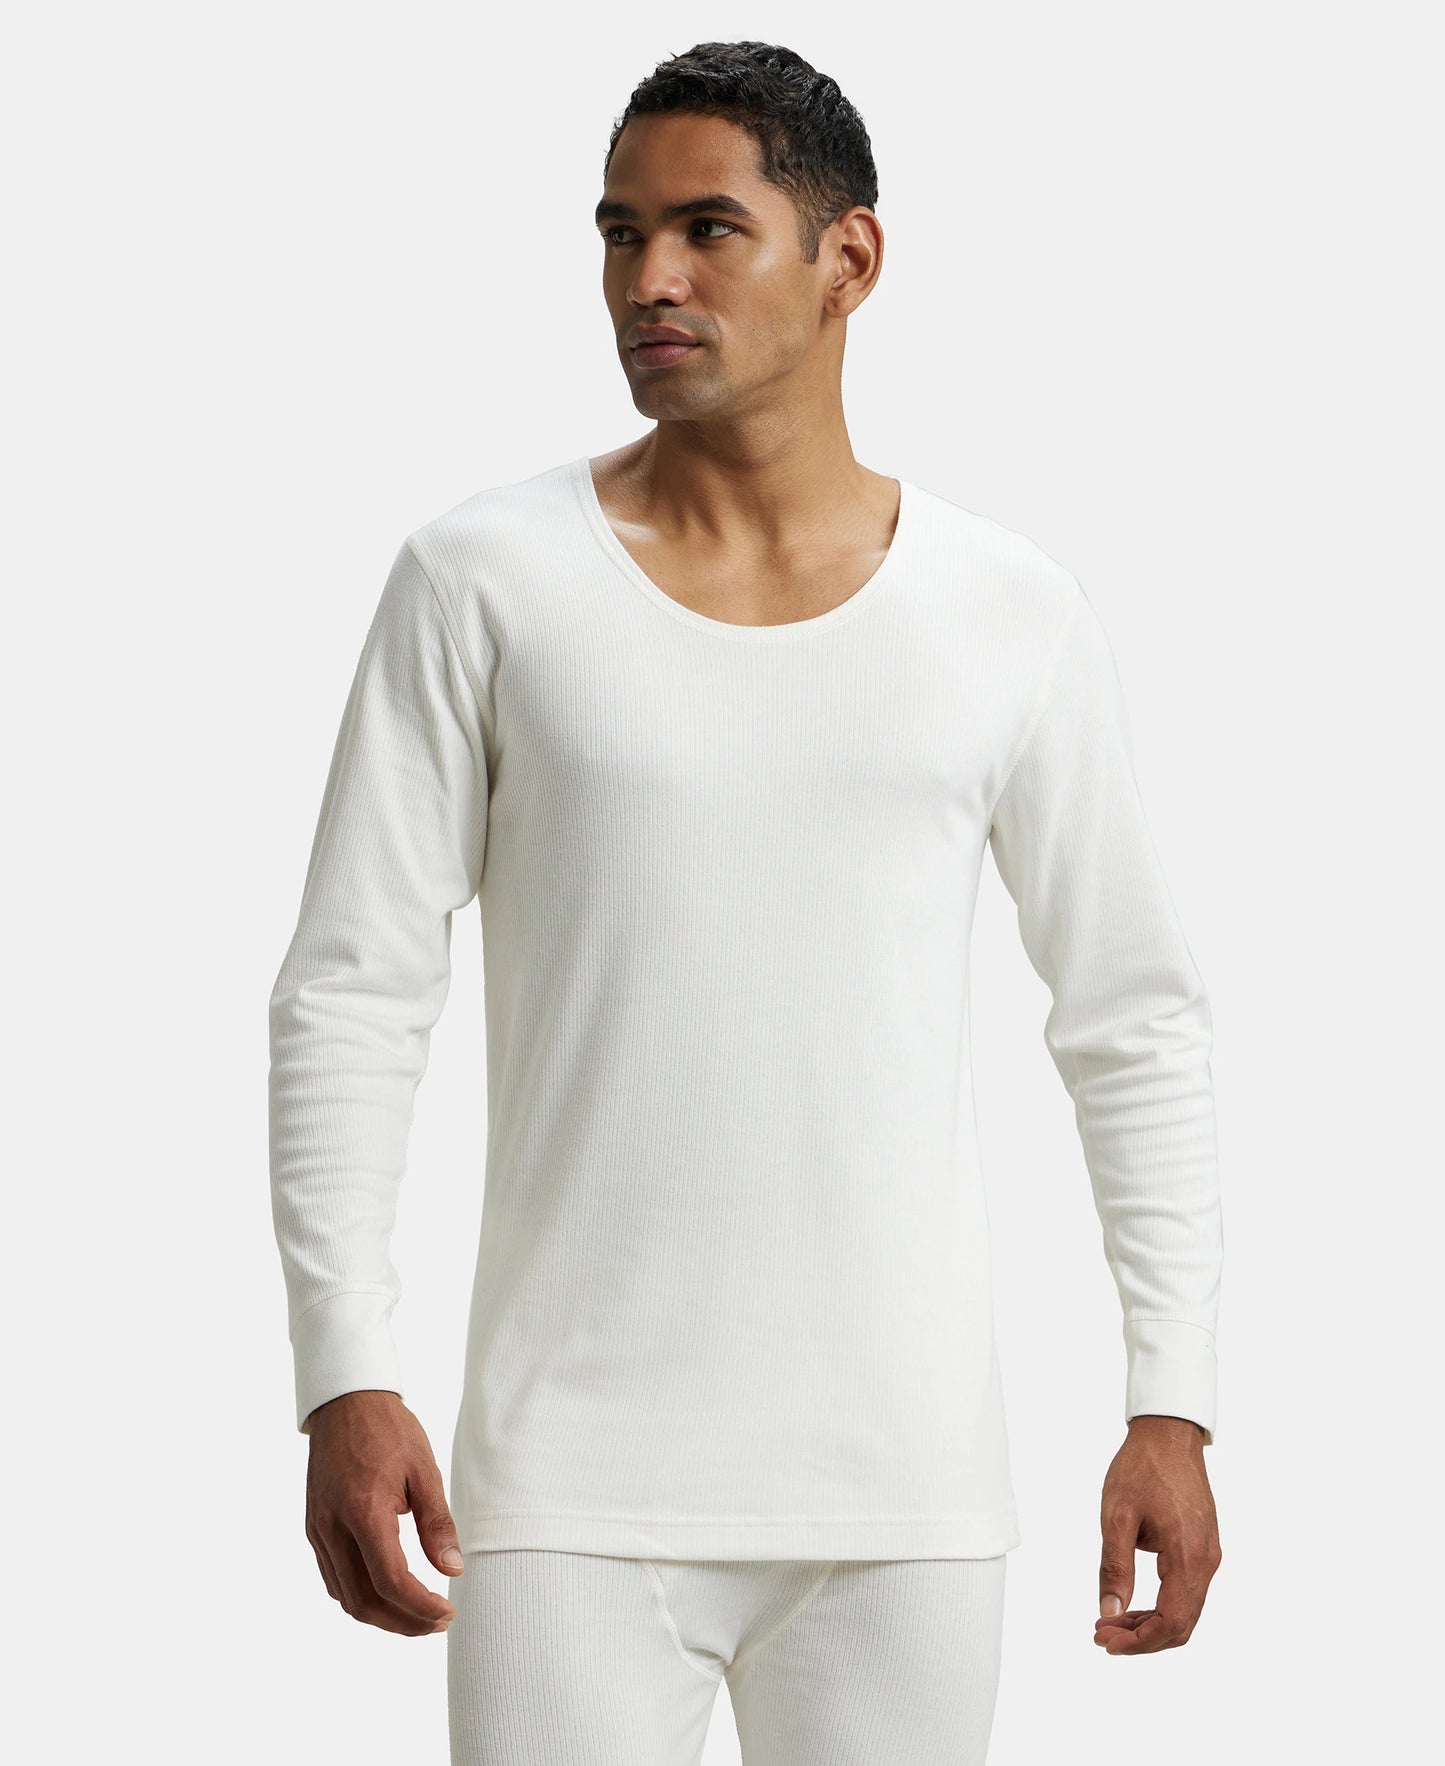 Super Combed Cotton Rich Full Sleeve Thermal Undershirt with StayWarm Technology - Off White-5